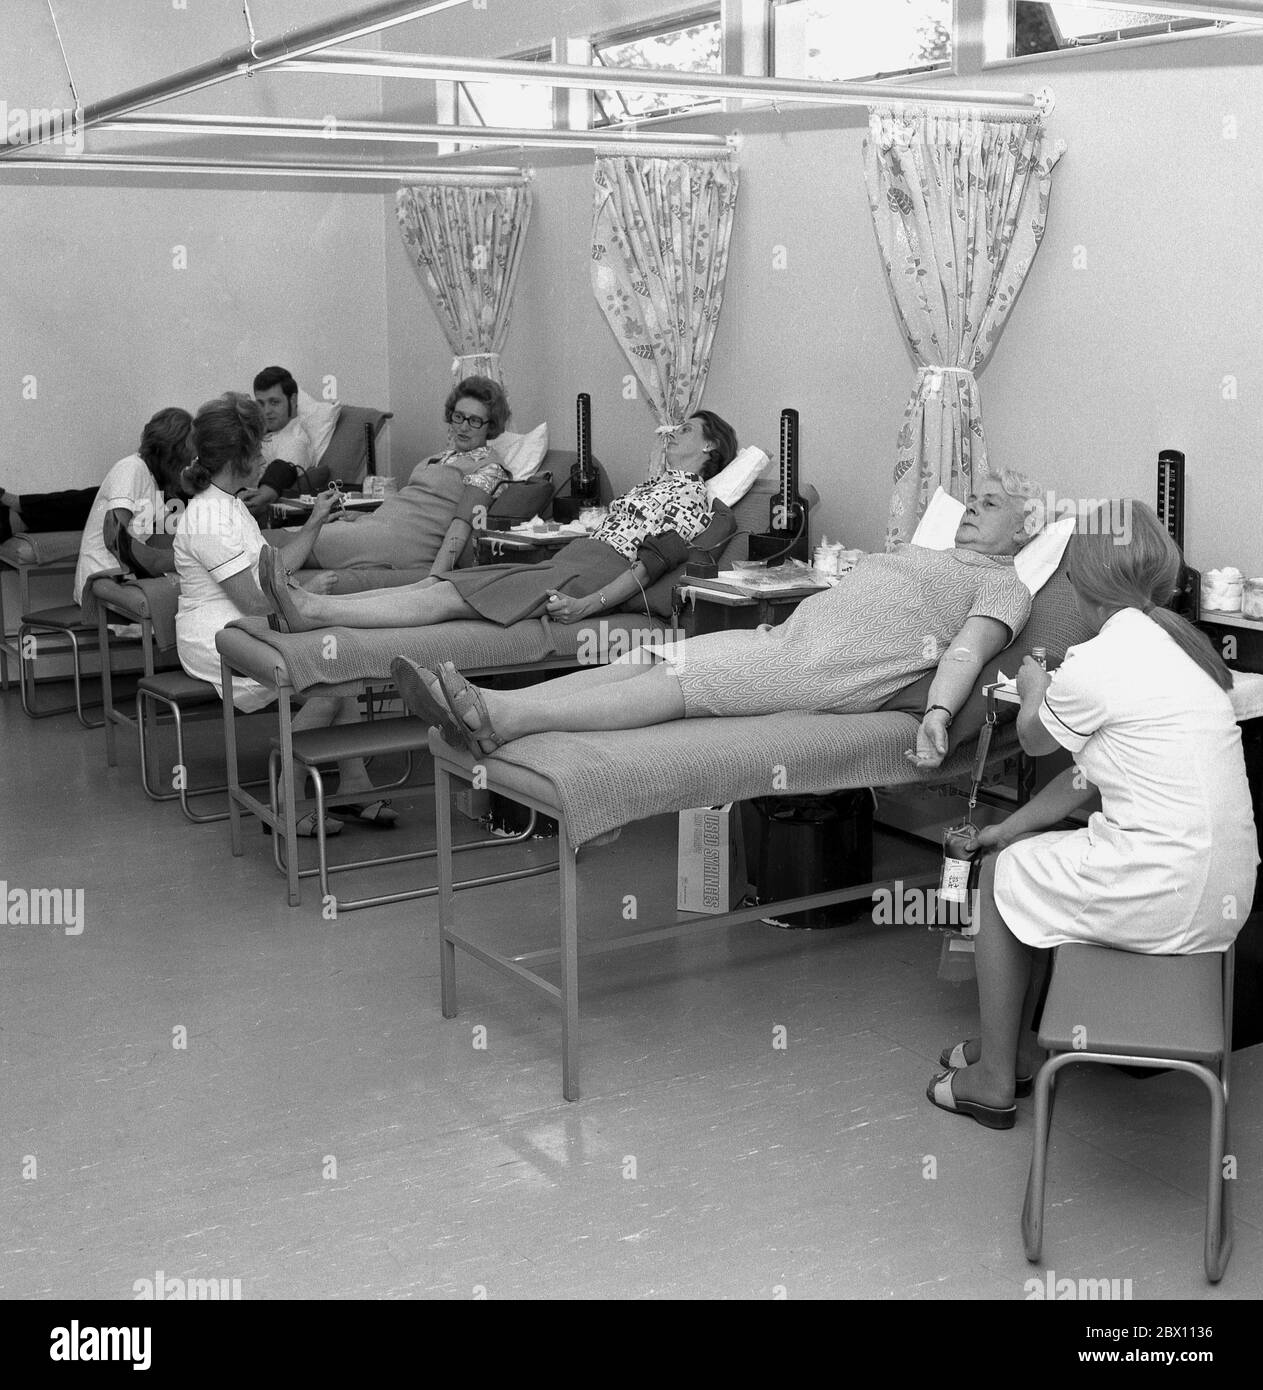 'Blood donors', members of the public lying on surgical beds in a medical or health centre voluntarily giving blood, Lewisham, South London, late 60s, early 1970s. Giving blood for community supply is public-spirited act by people as blood can save lives. Stock Photo